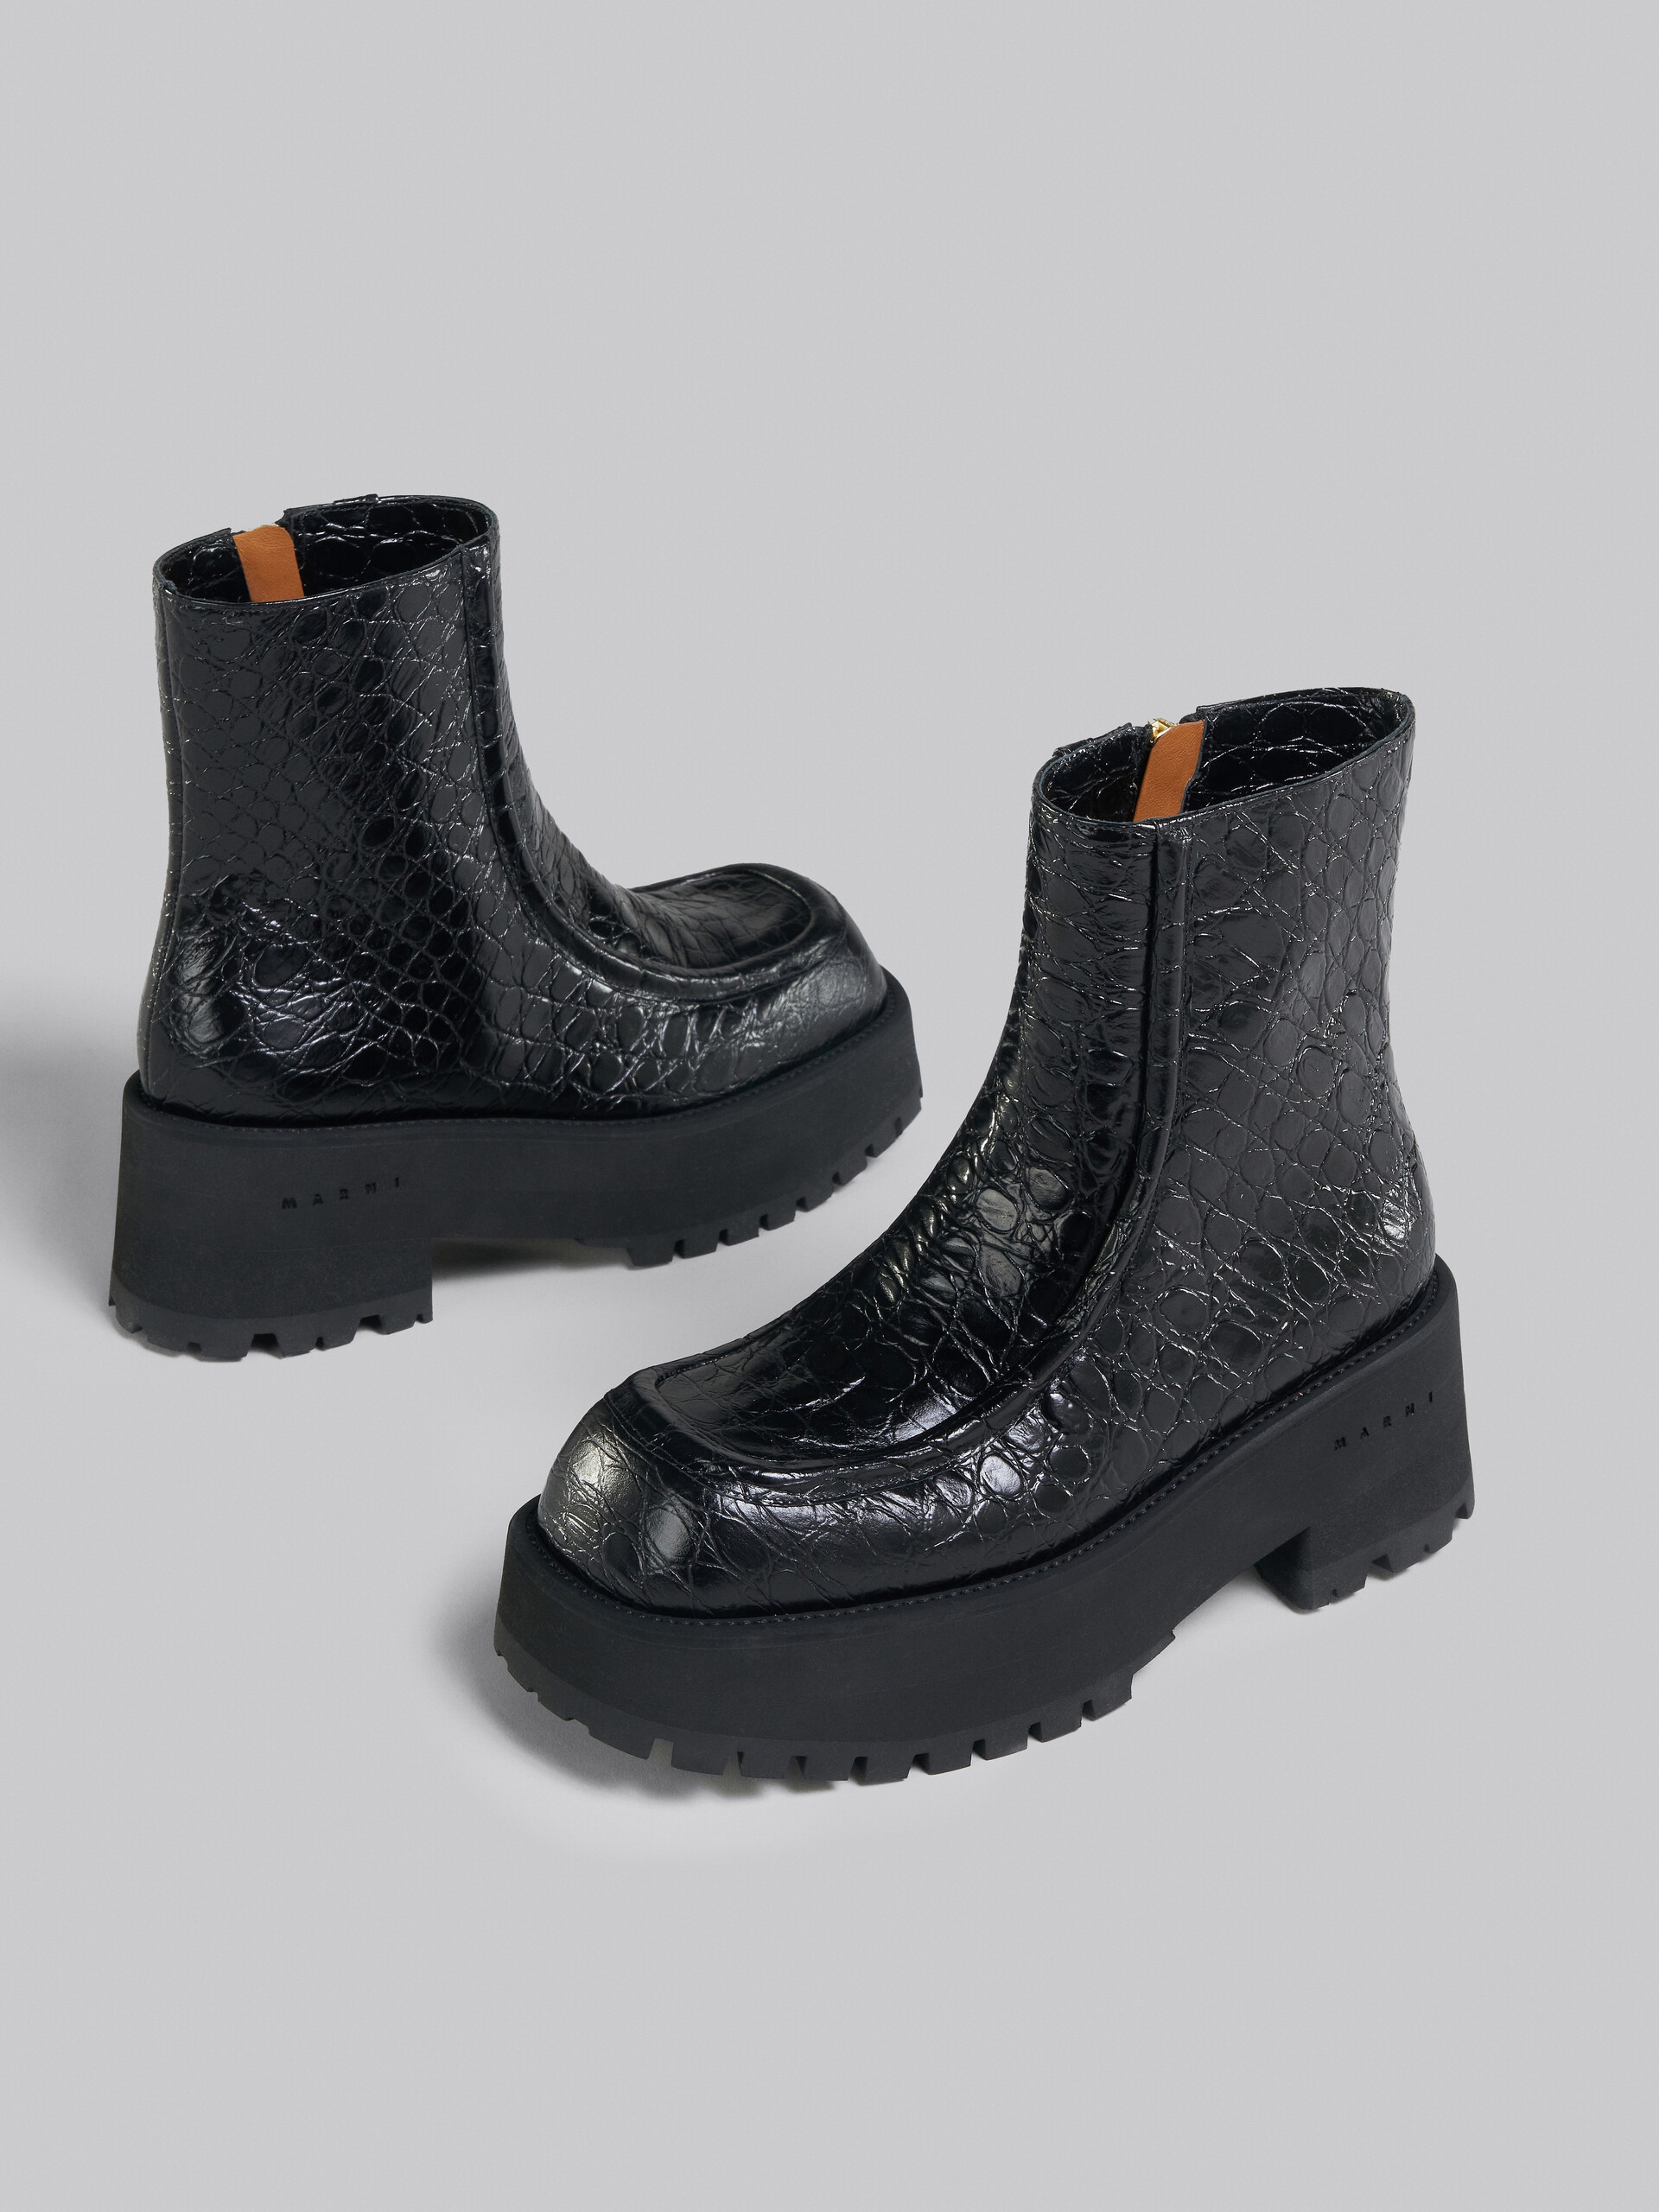 Ankle boot in black croco print leather - Boots - Image 4